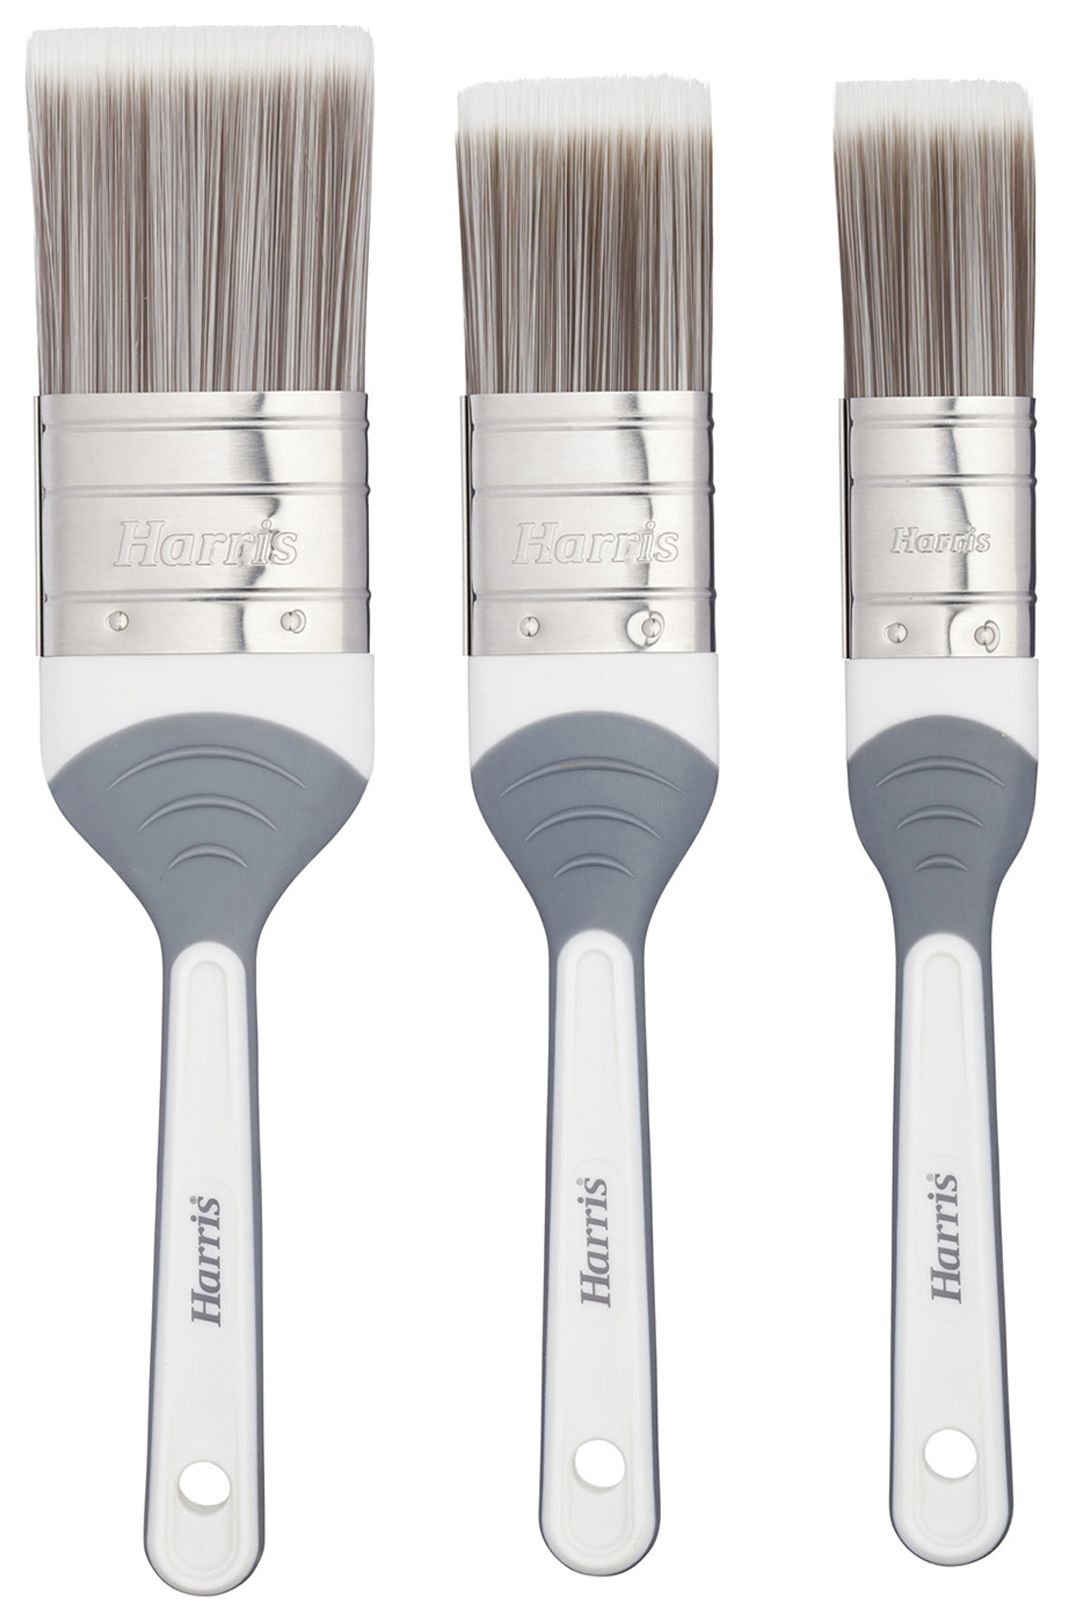 Image of Harris Seriously Good Walls & Ceiling Paint Brush Set - Pack of 3